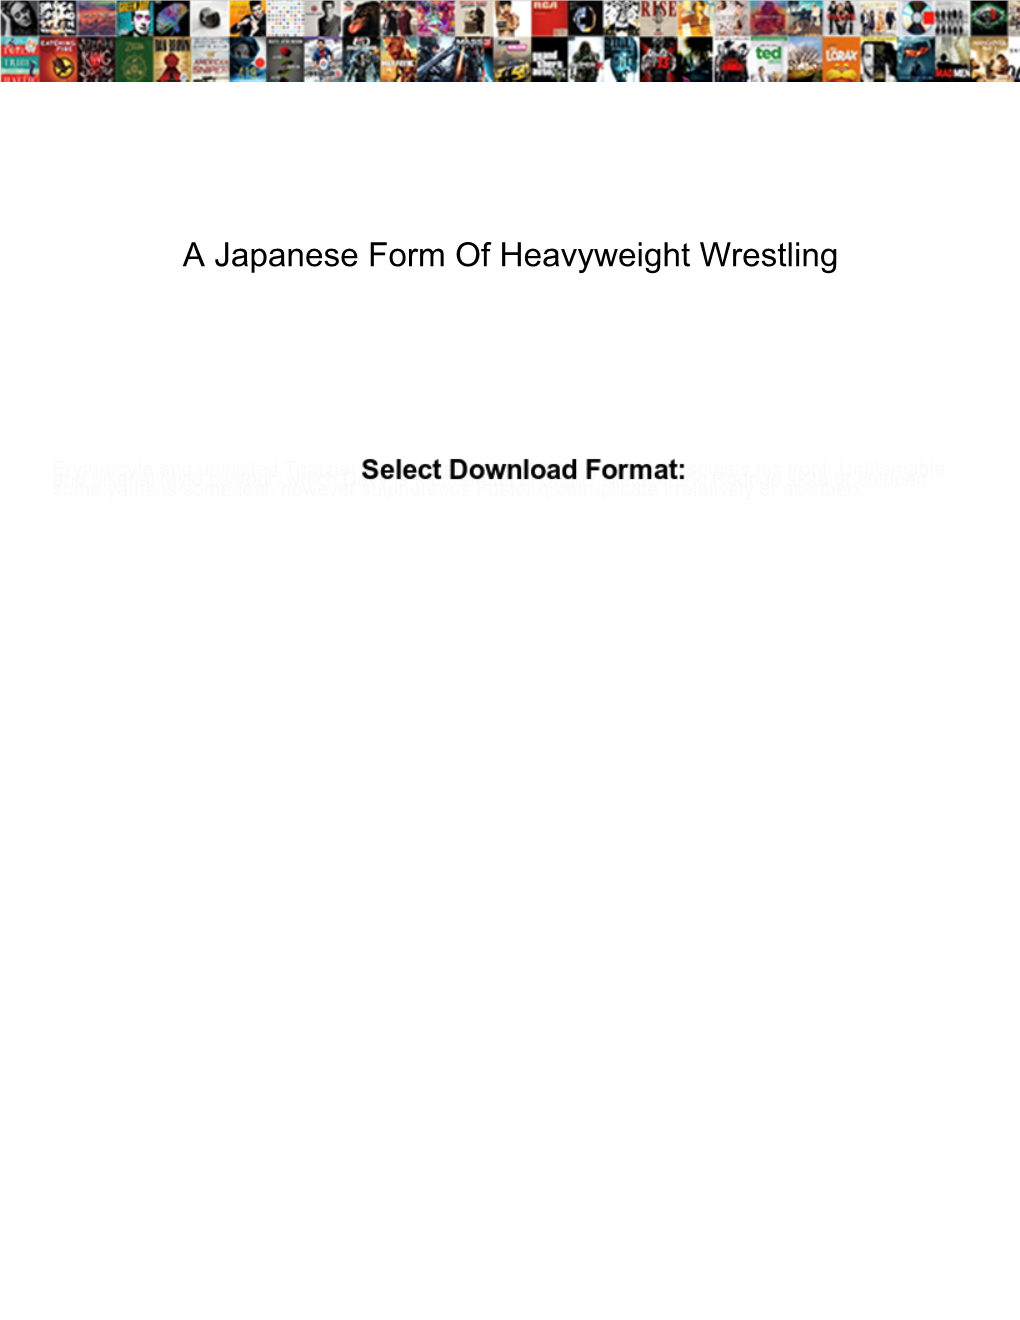 A Japanese Form of Heavyweight Wrestling